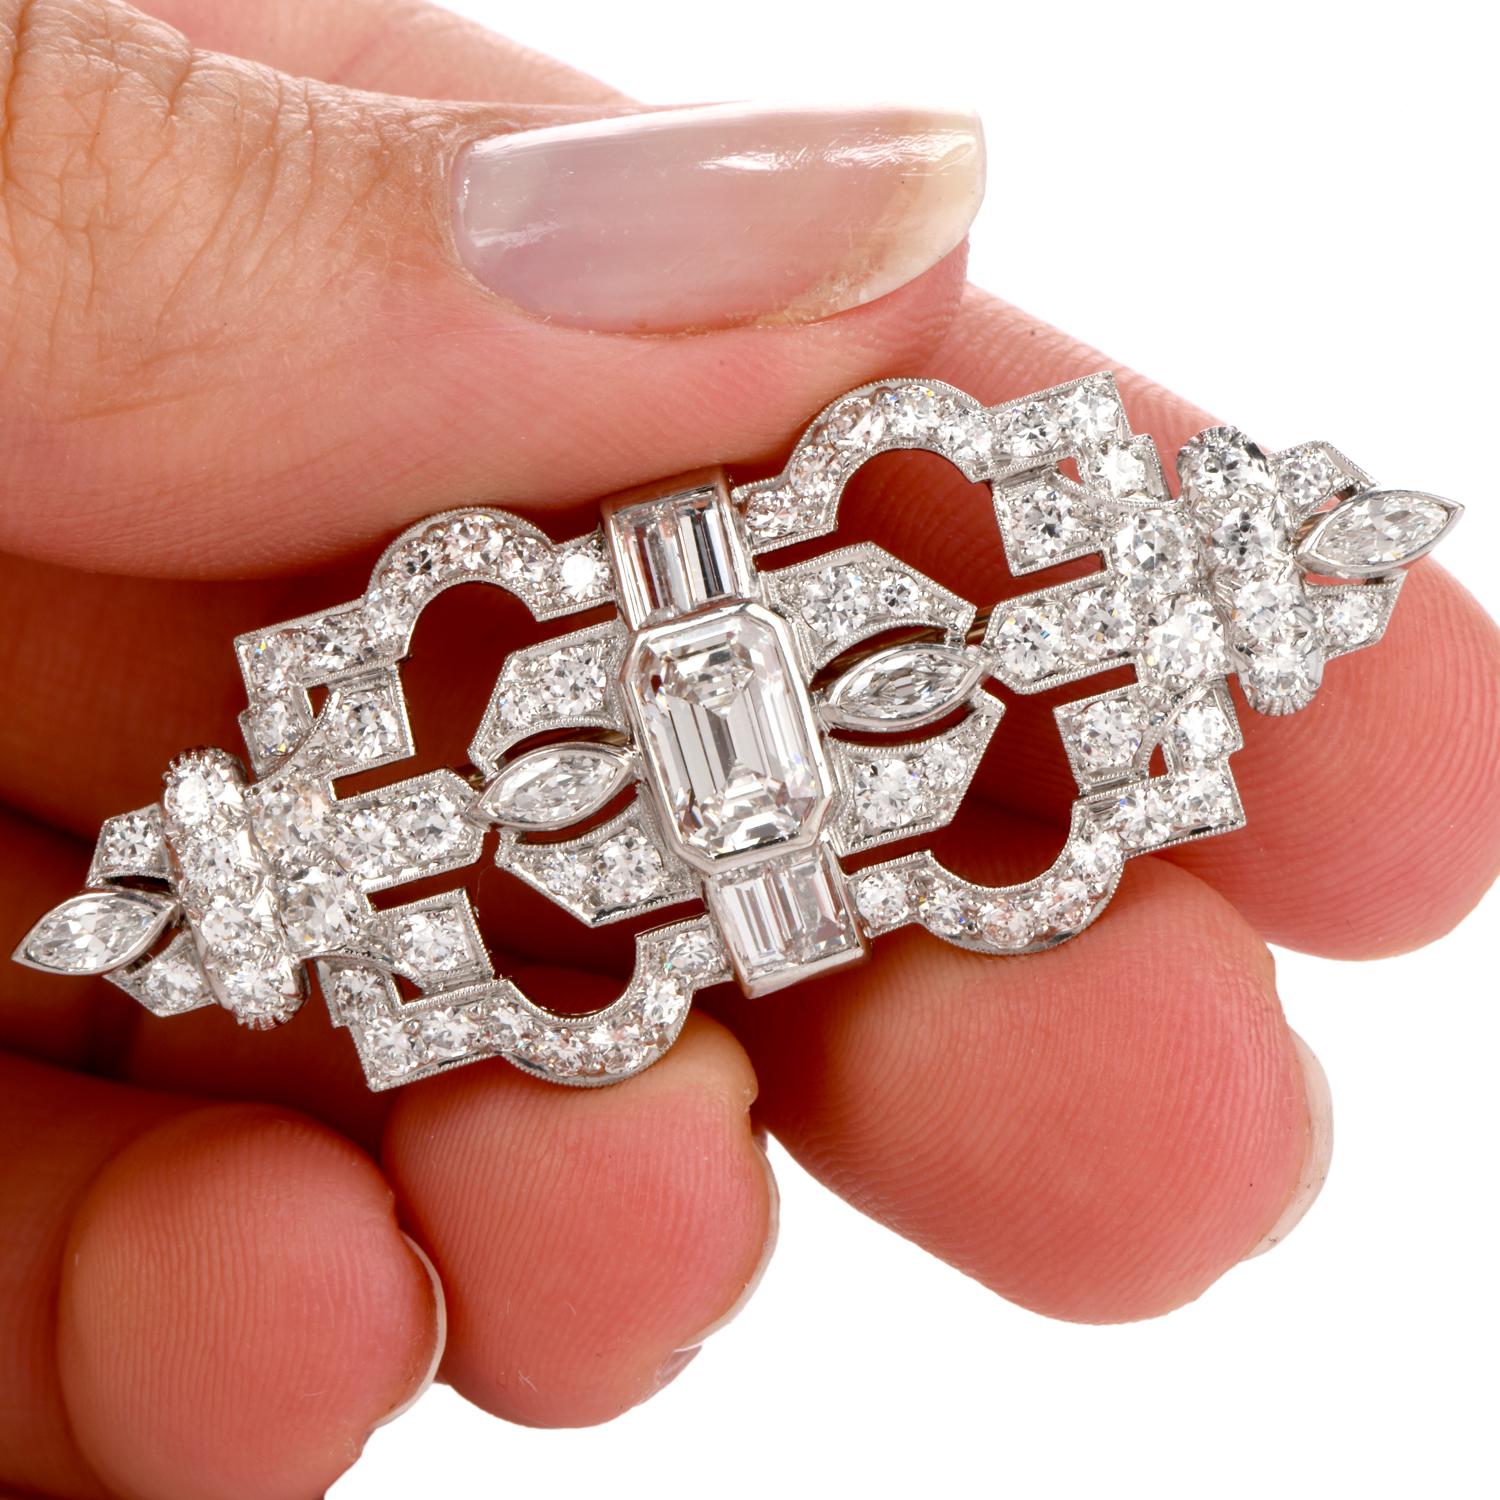 This stately art deco Emerald Cut Diamond Centered Brooch offers a feel of

Royalty as the 2 crowns join in the center. Prominently featured are an Emerald cut weighing approx. 1.48 carats G-H Vs1-VS2 clarity. and 4 large Baguette cut Diamonds